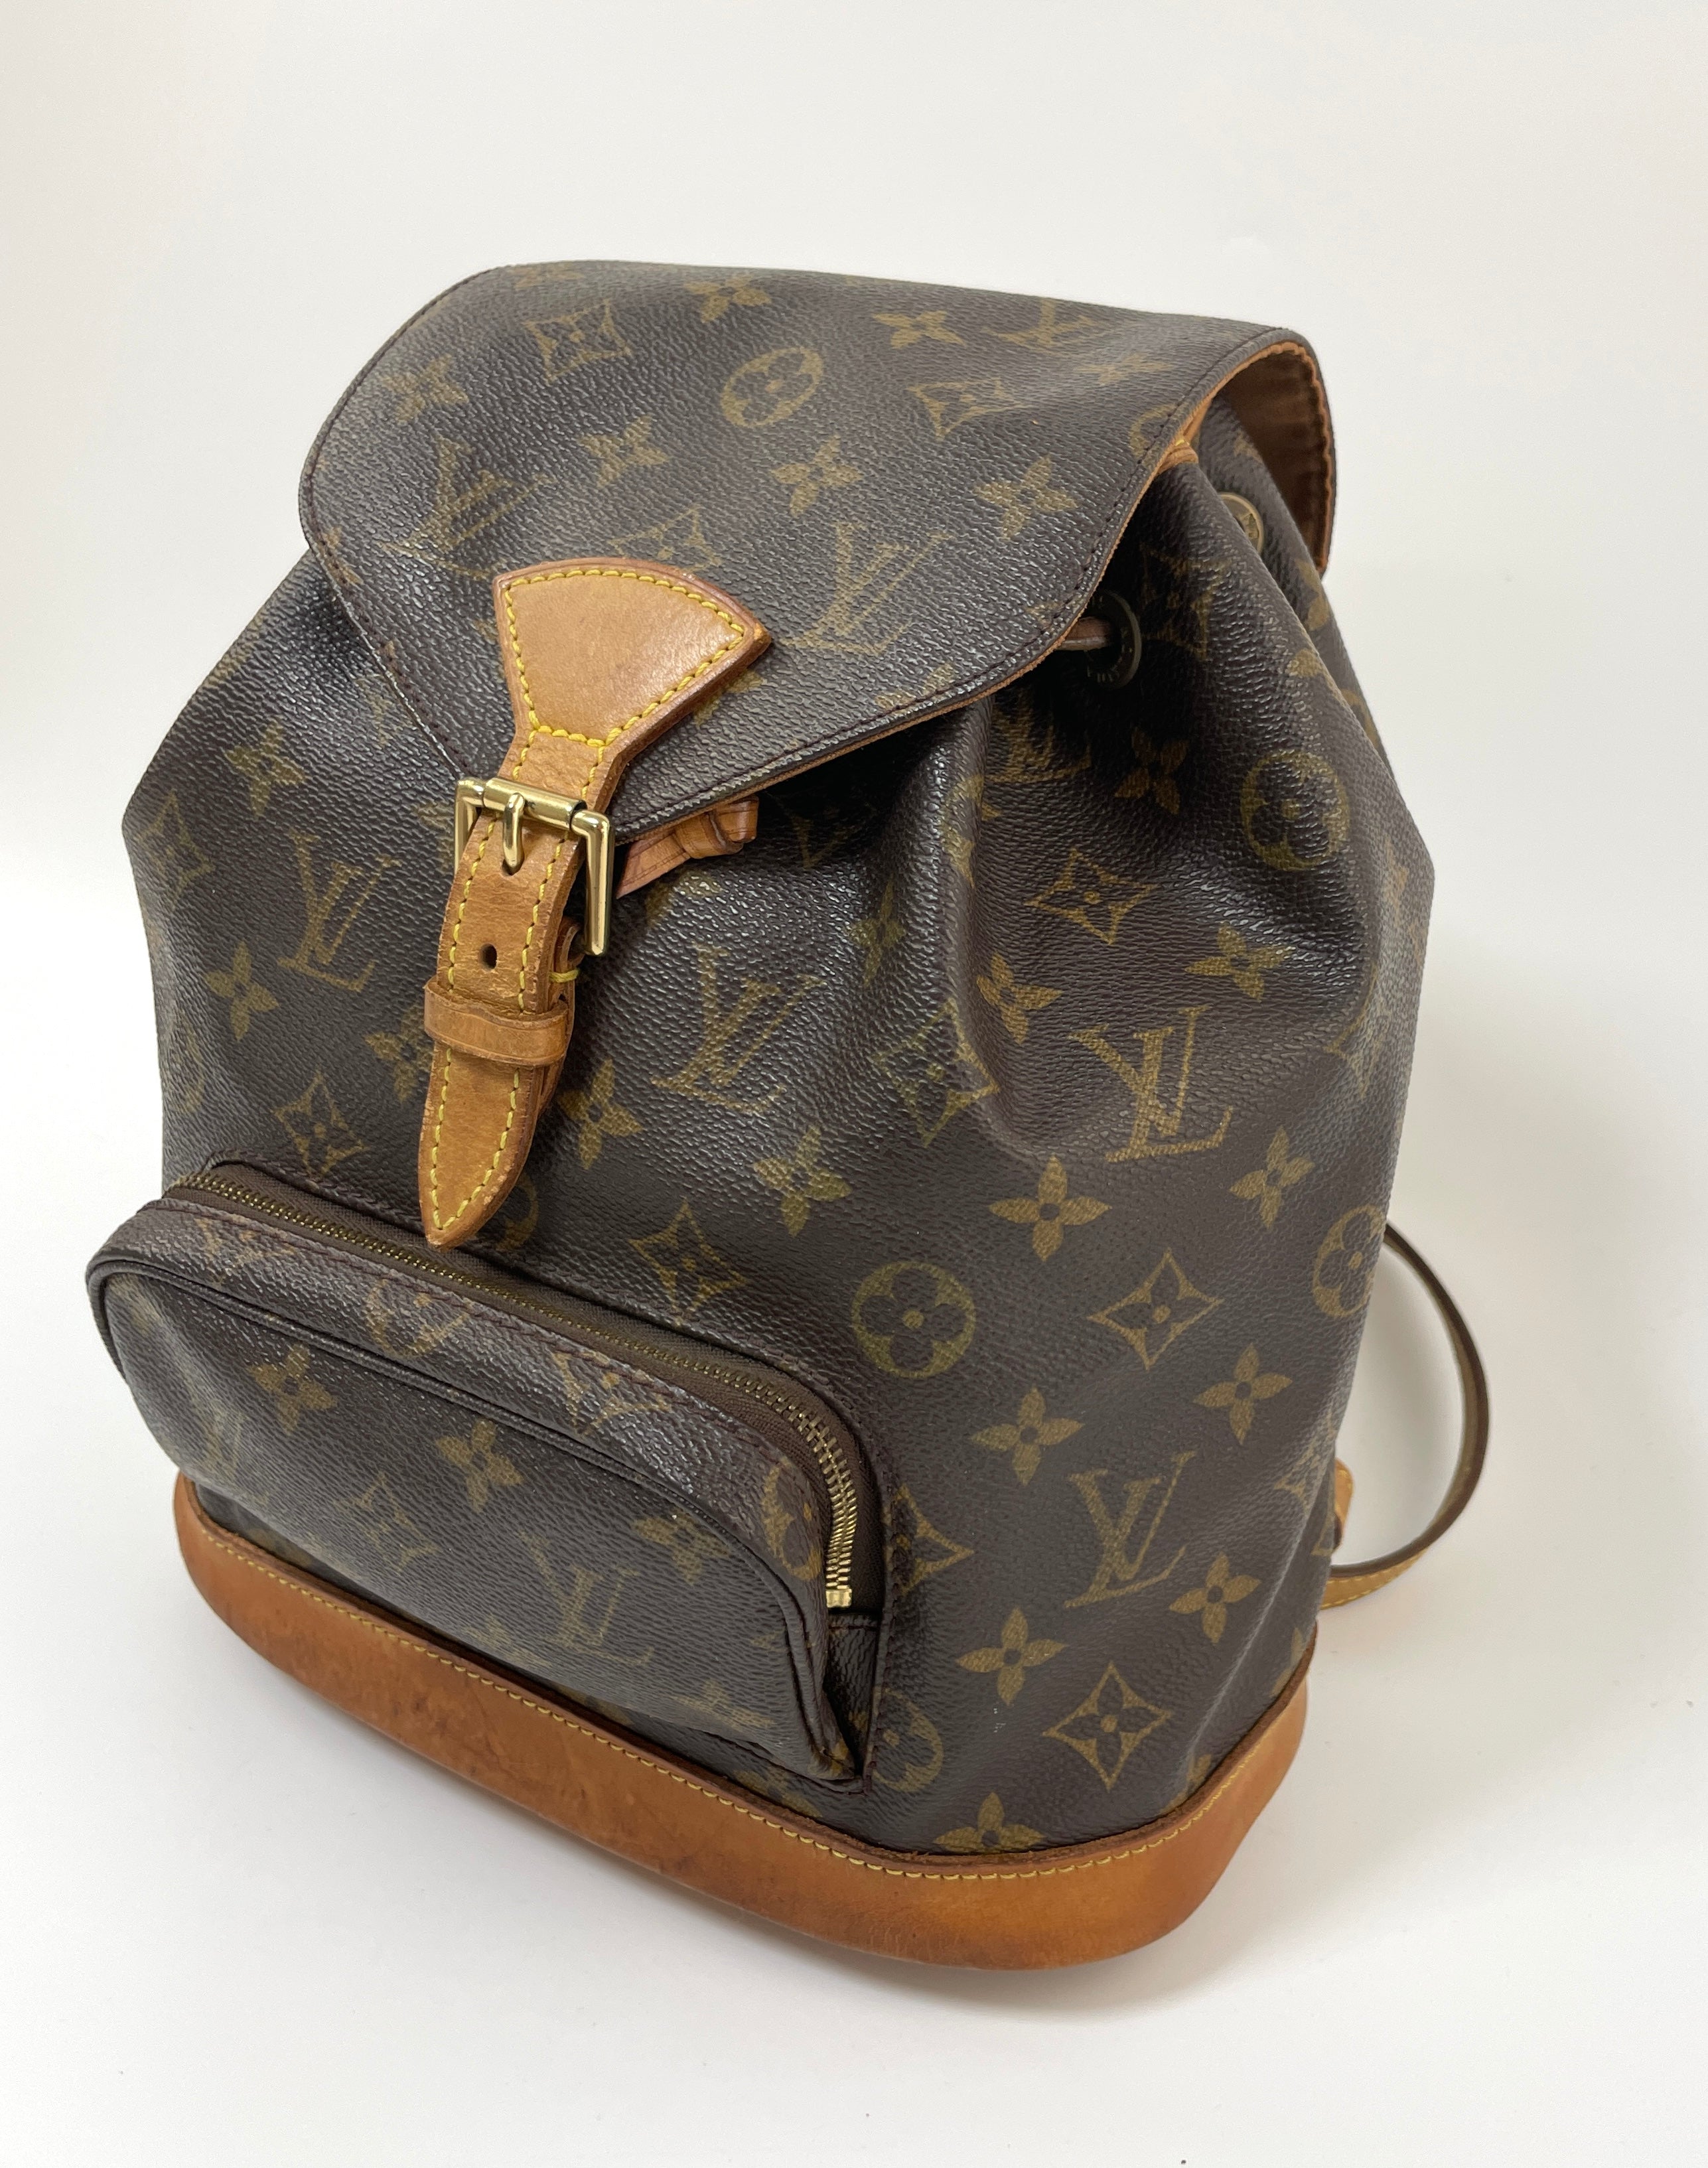 Louis Vuitton Montsouris Backpack second hand prices